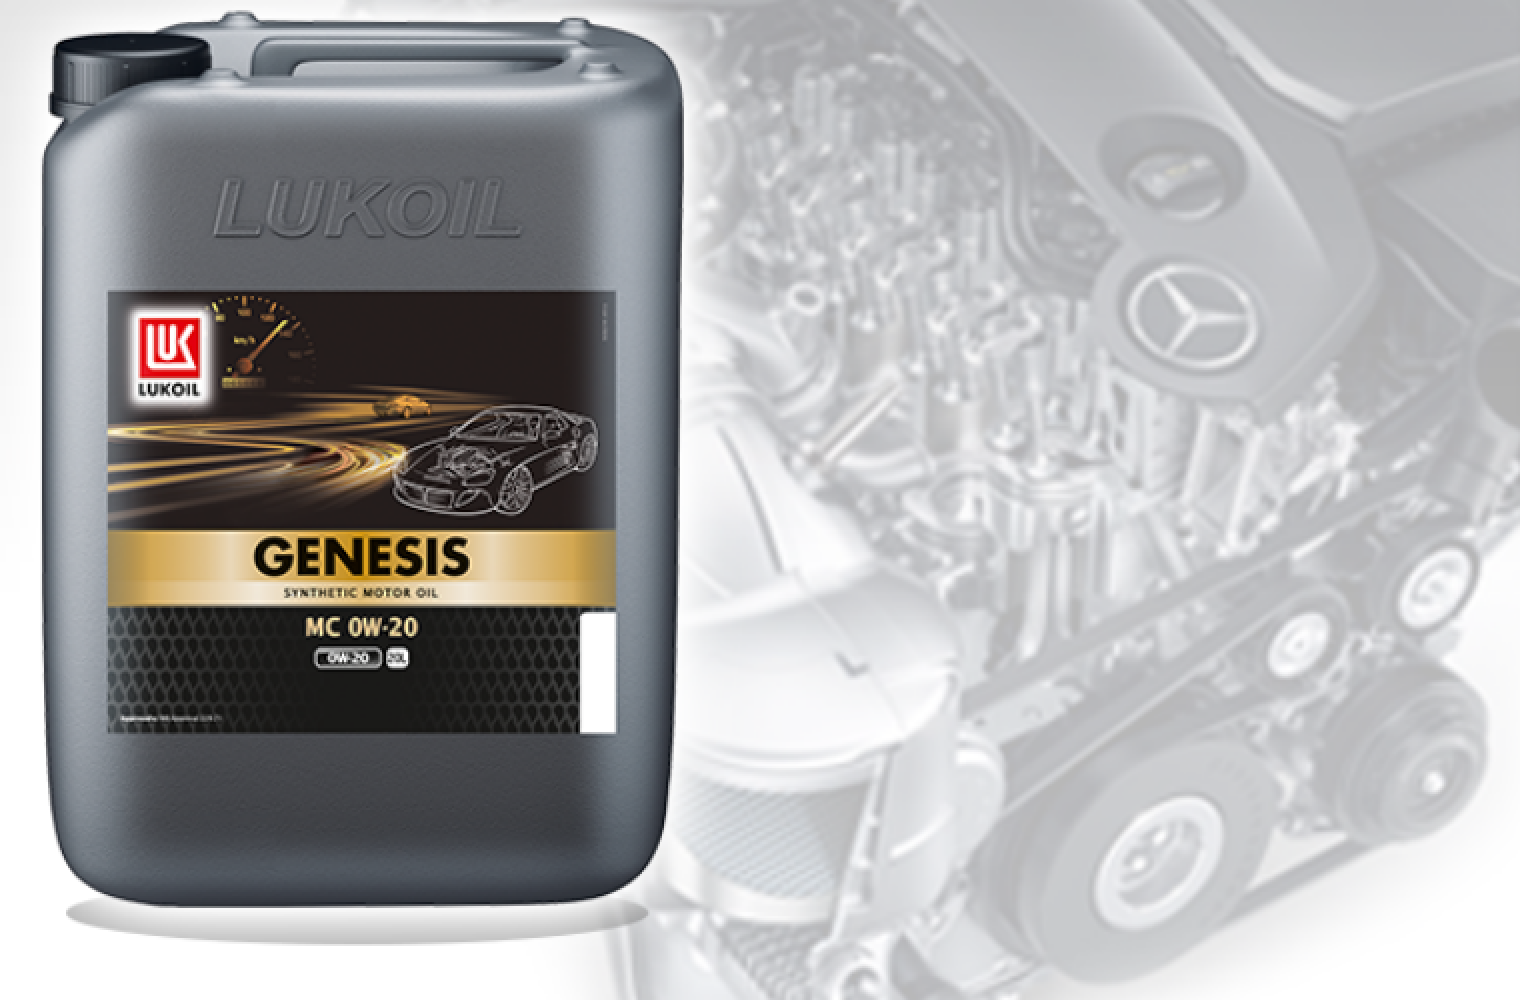 Lukoil Genesis 0w20. Генезис Лукойл 0-w20 Special. Моторное масло Лукойл 0w20. Genesis Special dx1 0w-20.